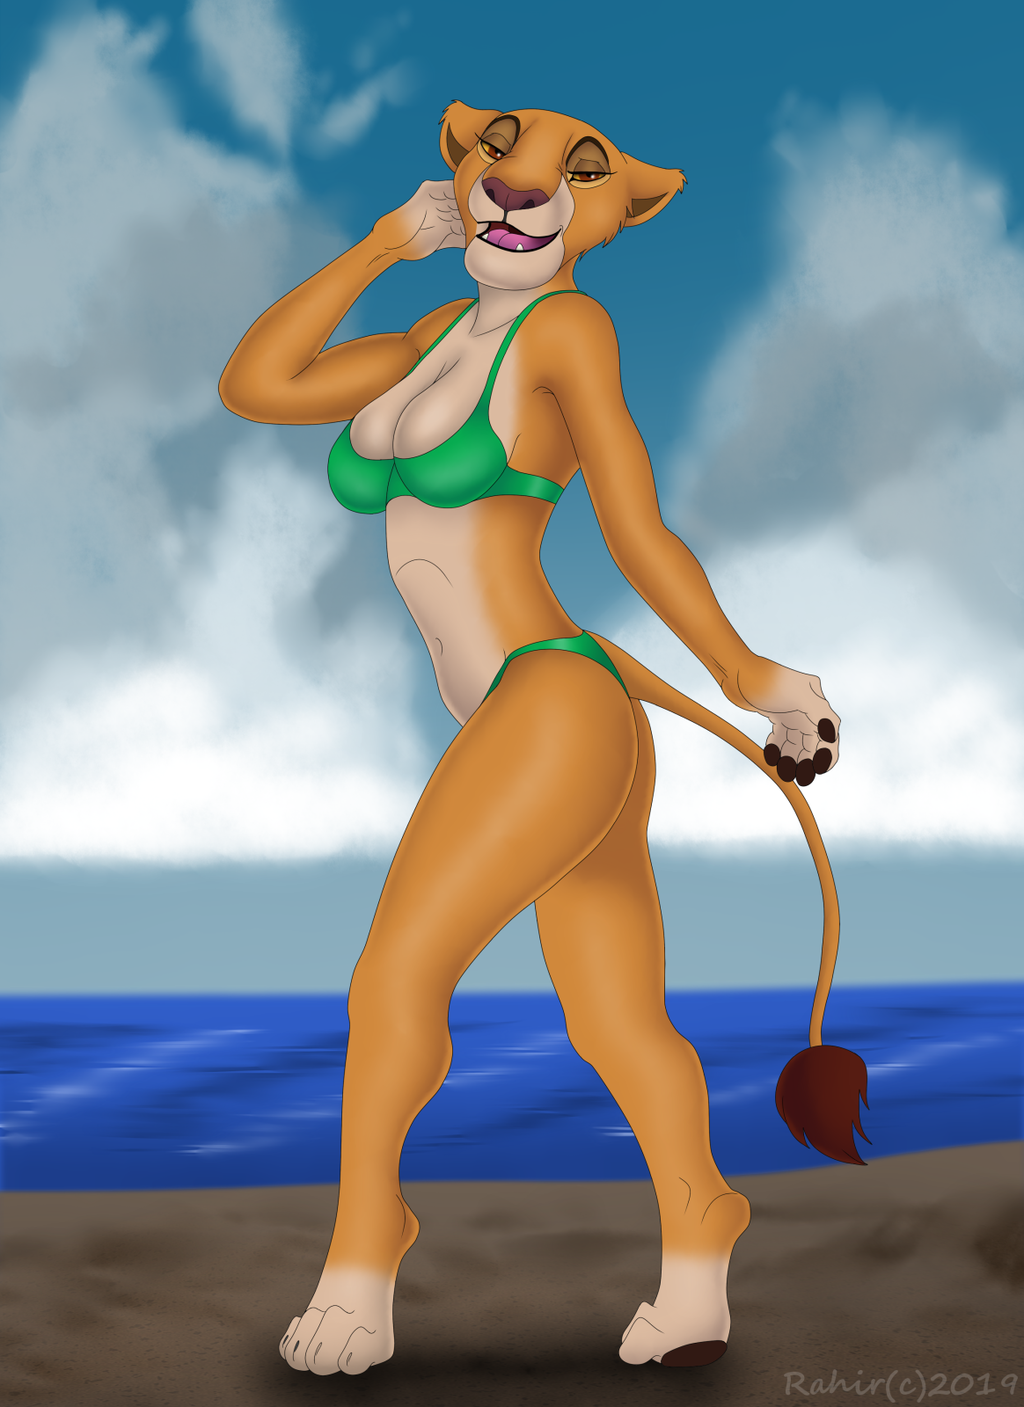 Swimsuit Issue #2